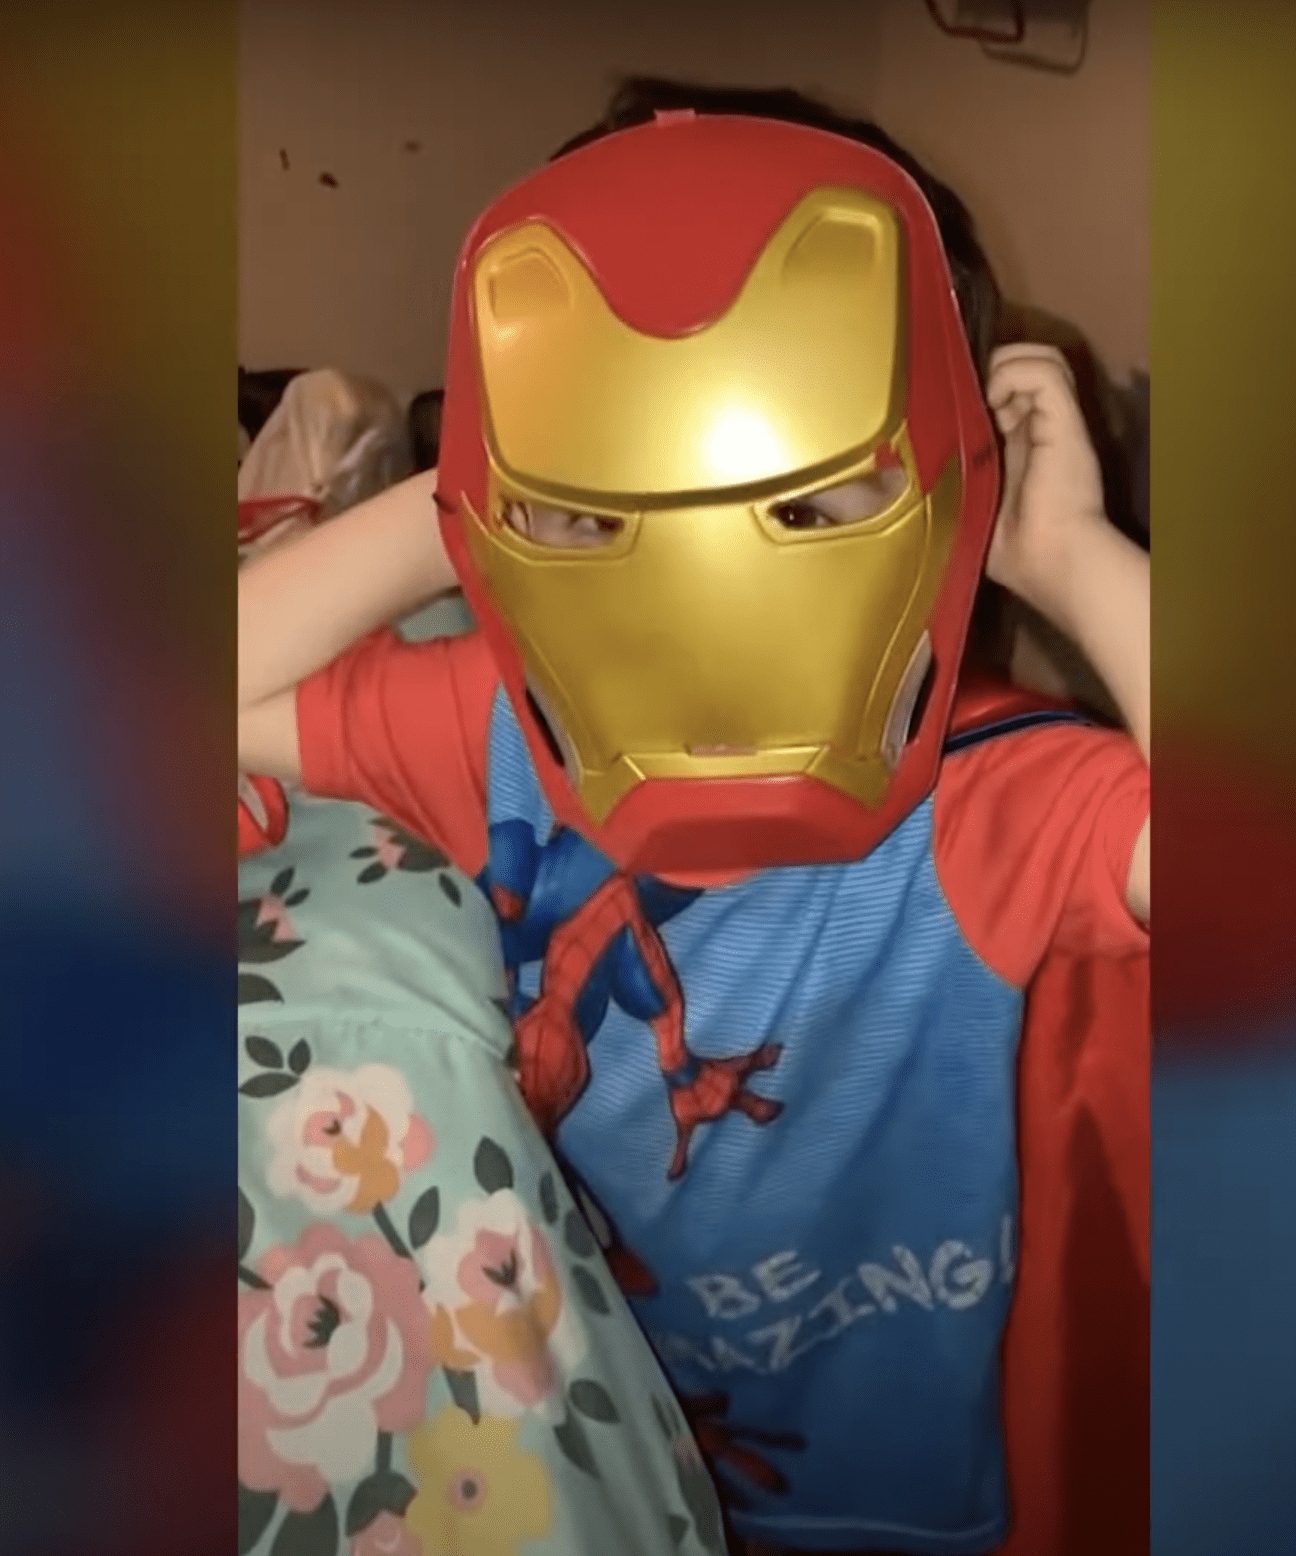 Mars Bedell dressed as Ironman. | Source: YouTube.com/KHOU 11